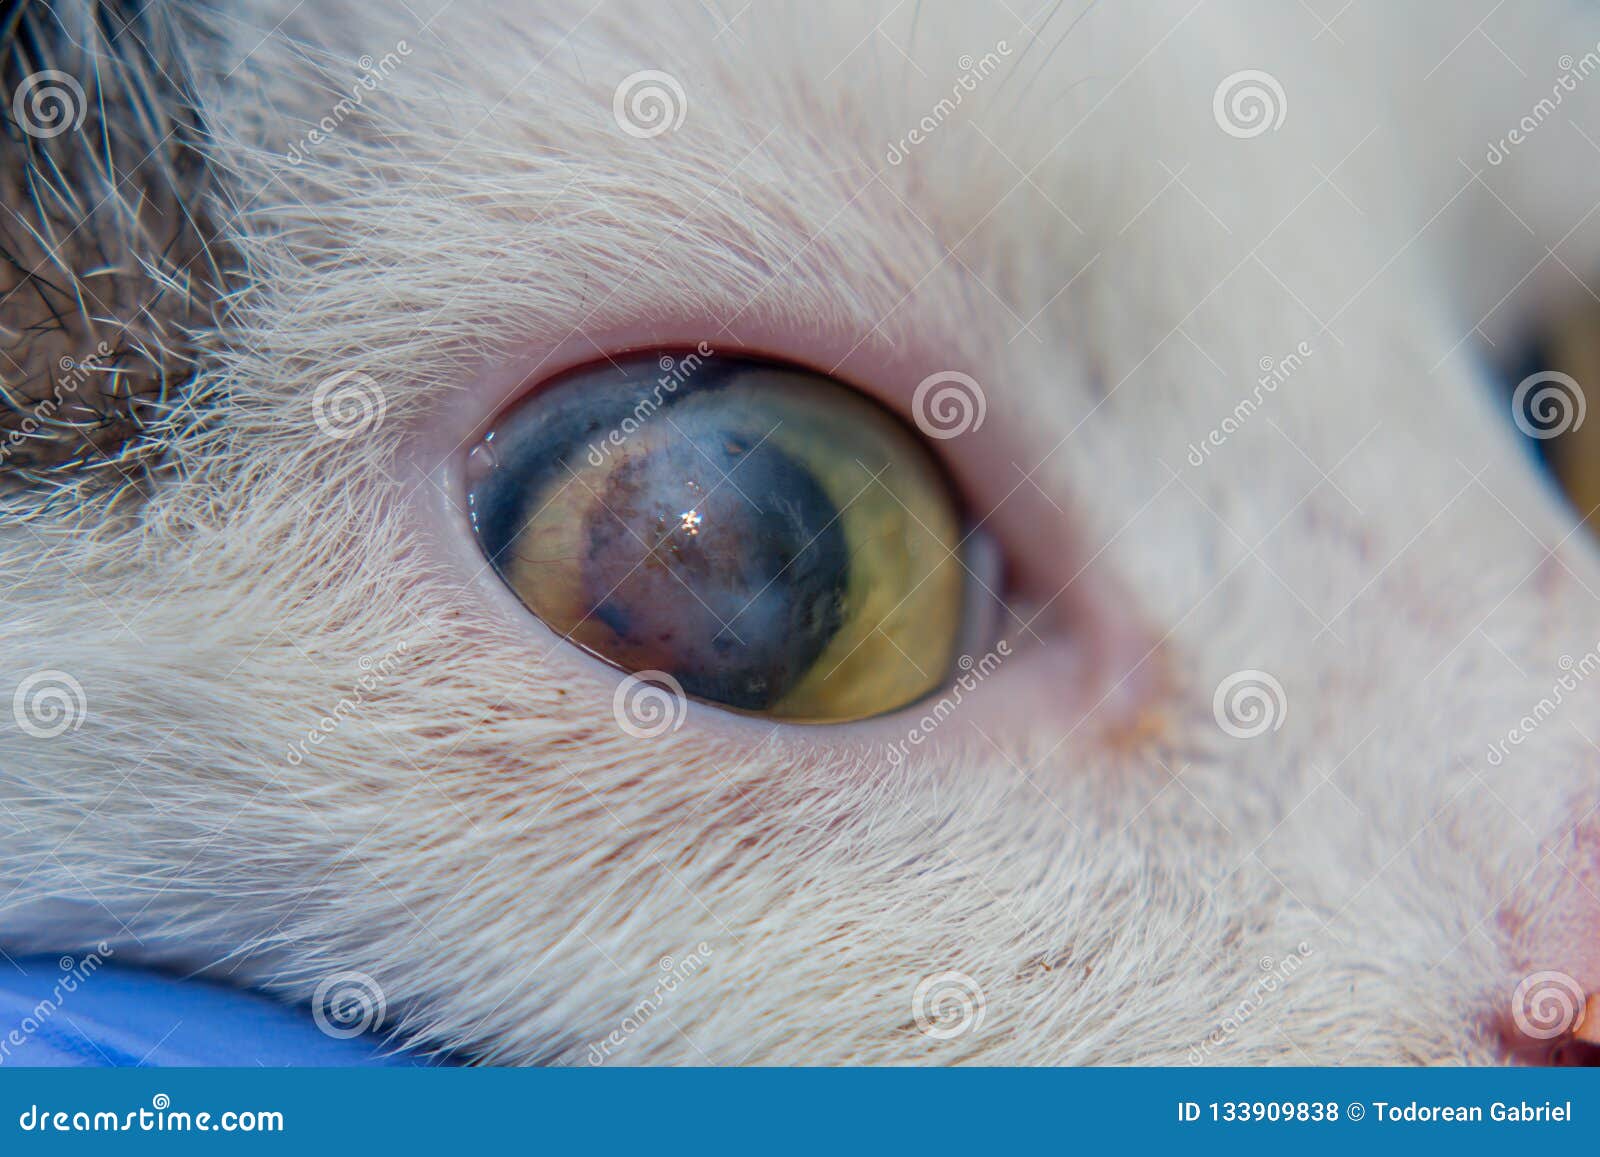 Adult Cat with Corneal Ulcer Stock Photo Image of veterinarian, adult